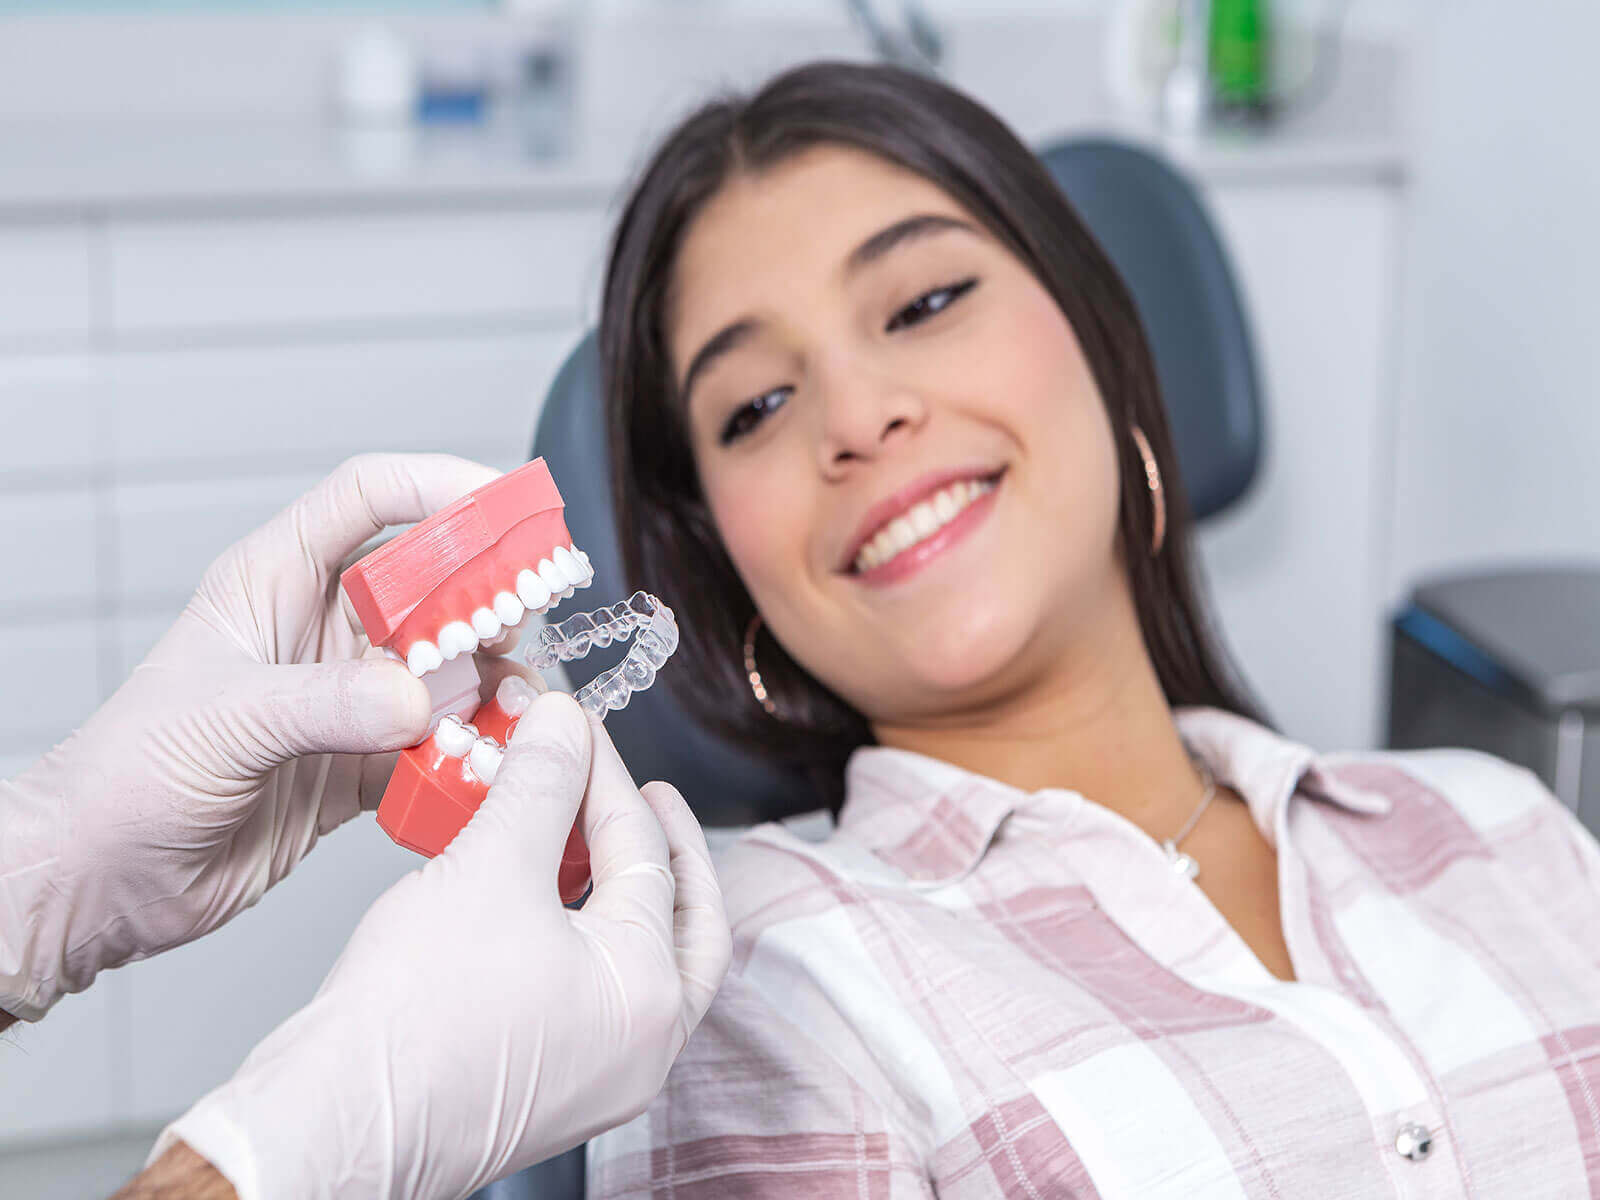 Signs That You Might Need Dental Bonding